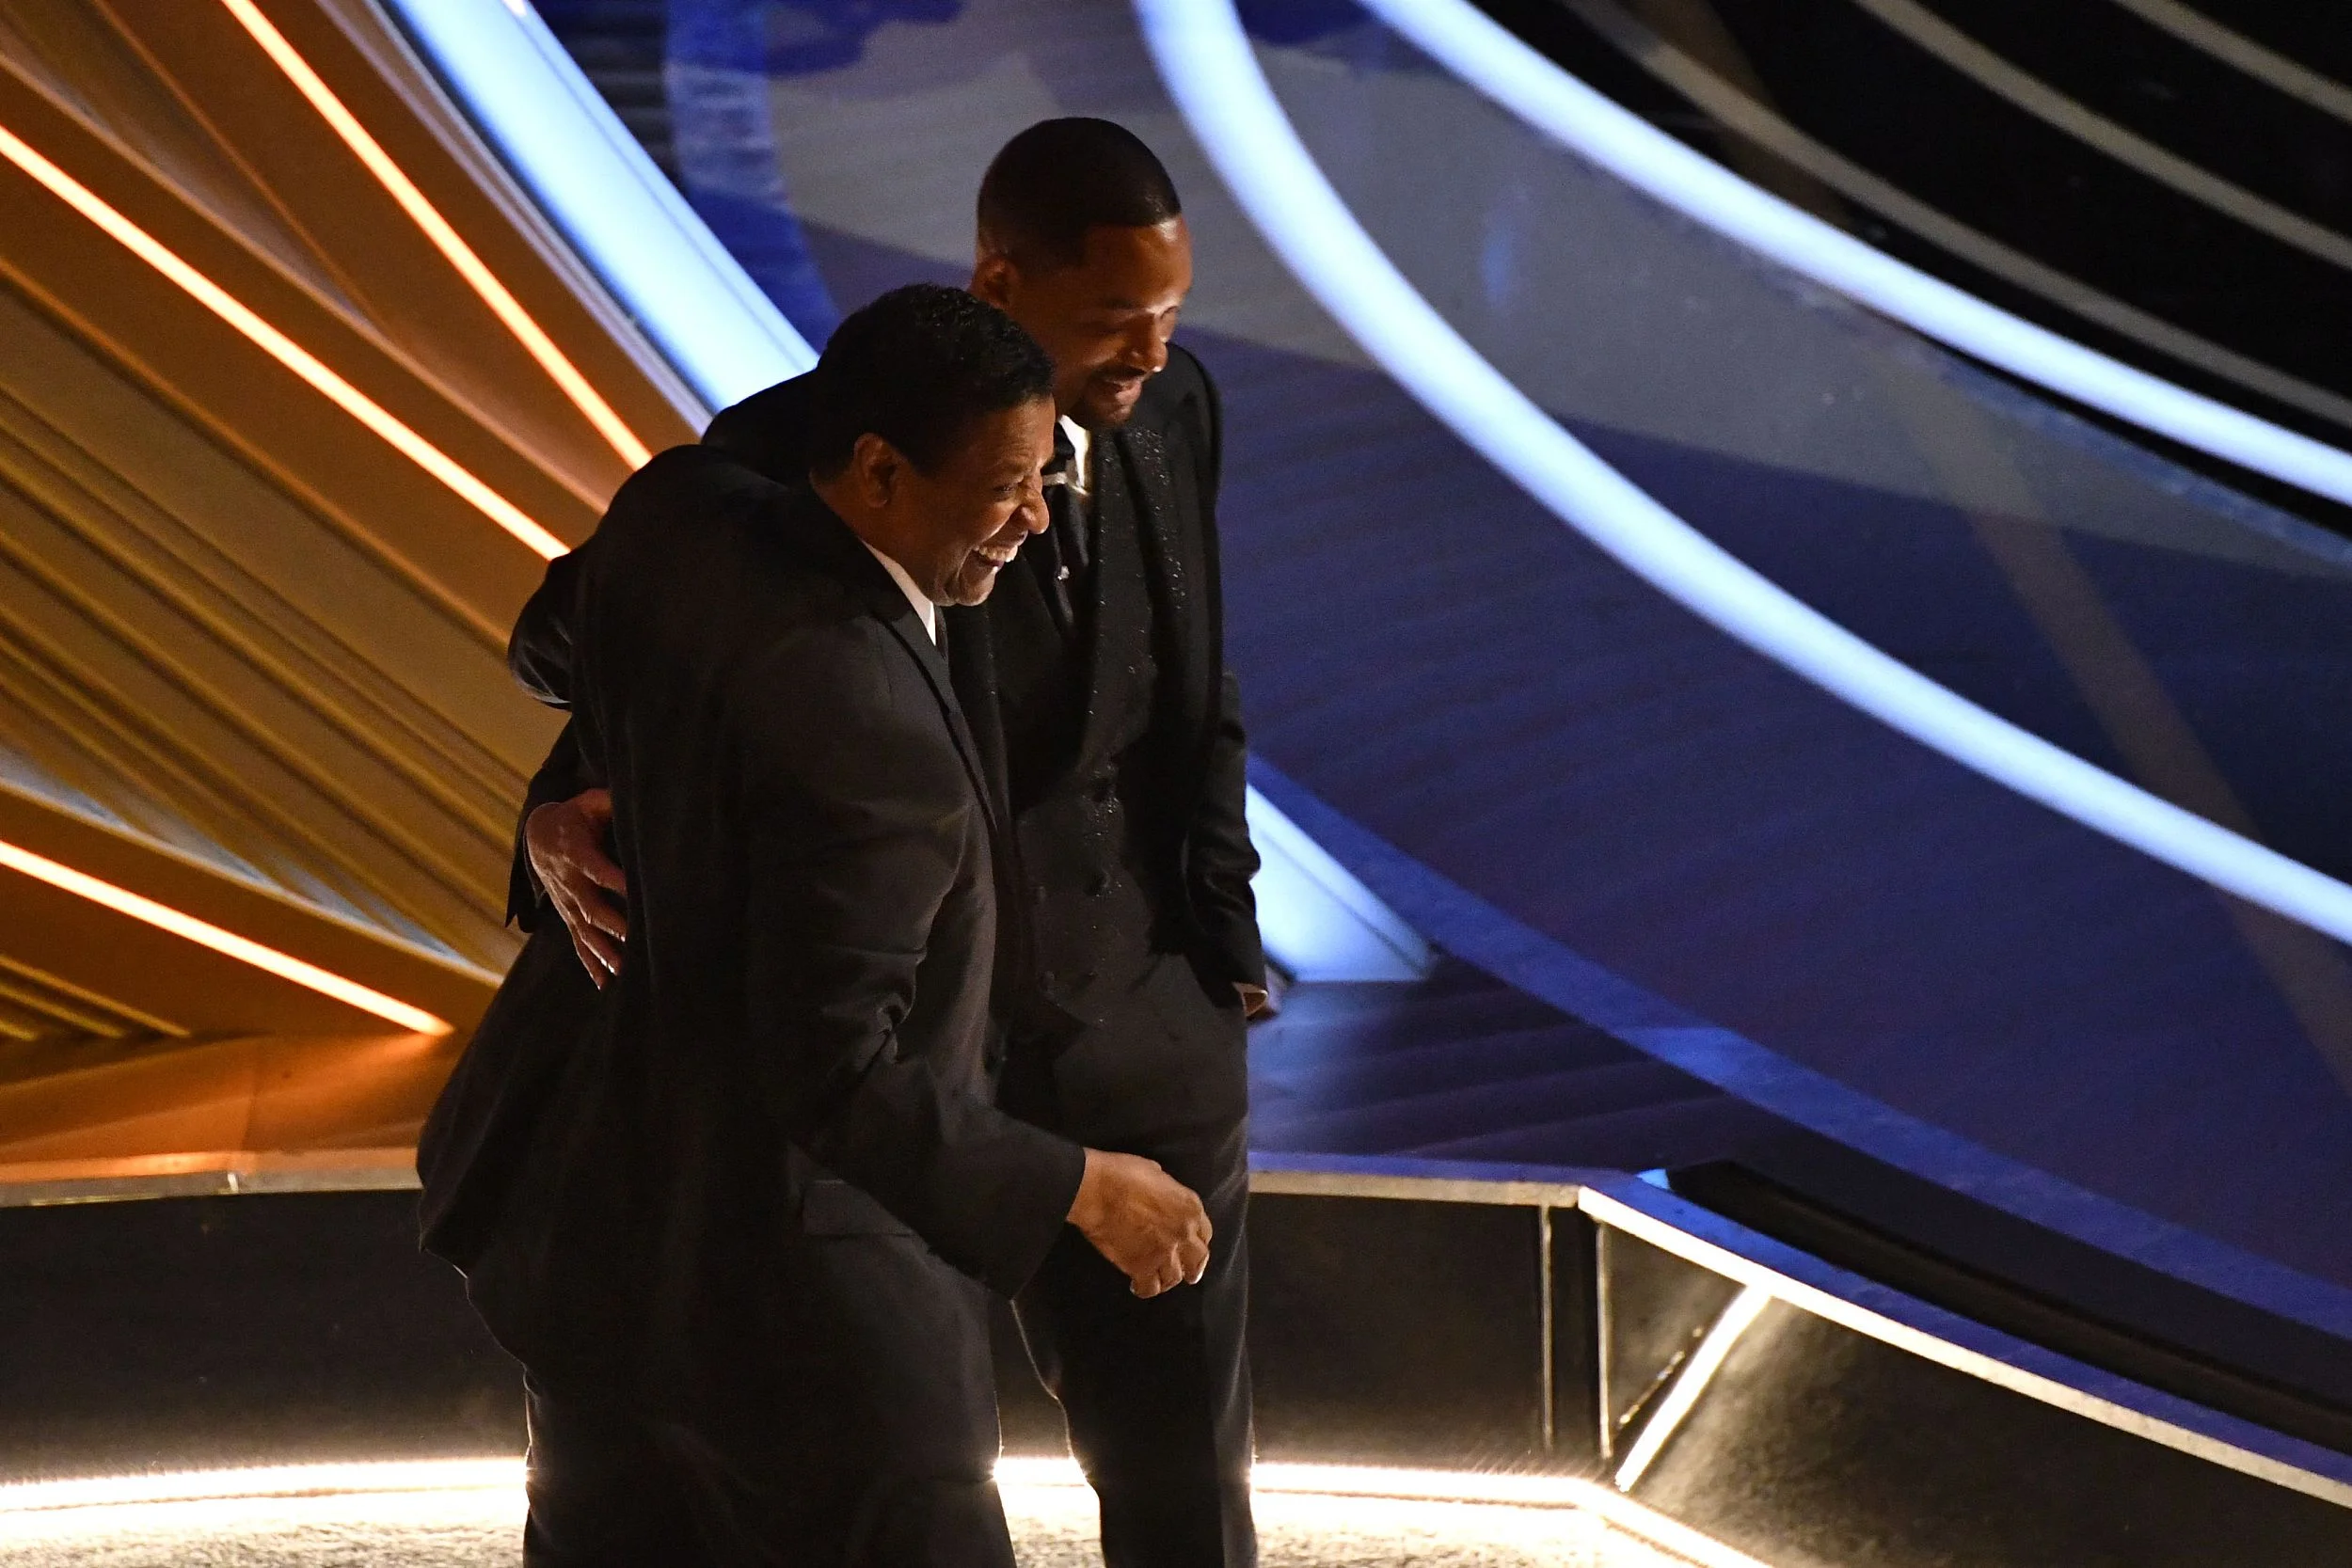 Will Smith slaps Chris Rock at the Oscars, and he apologizes to the Oscar committee afterwards